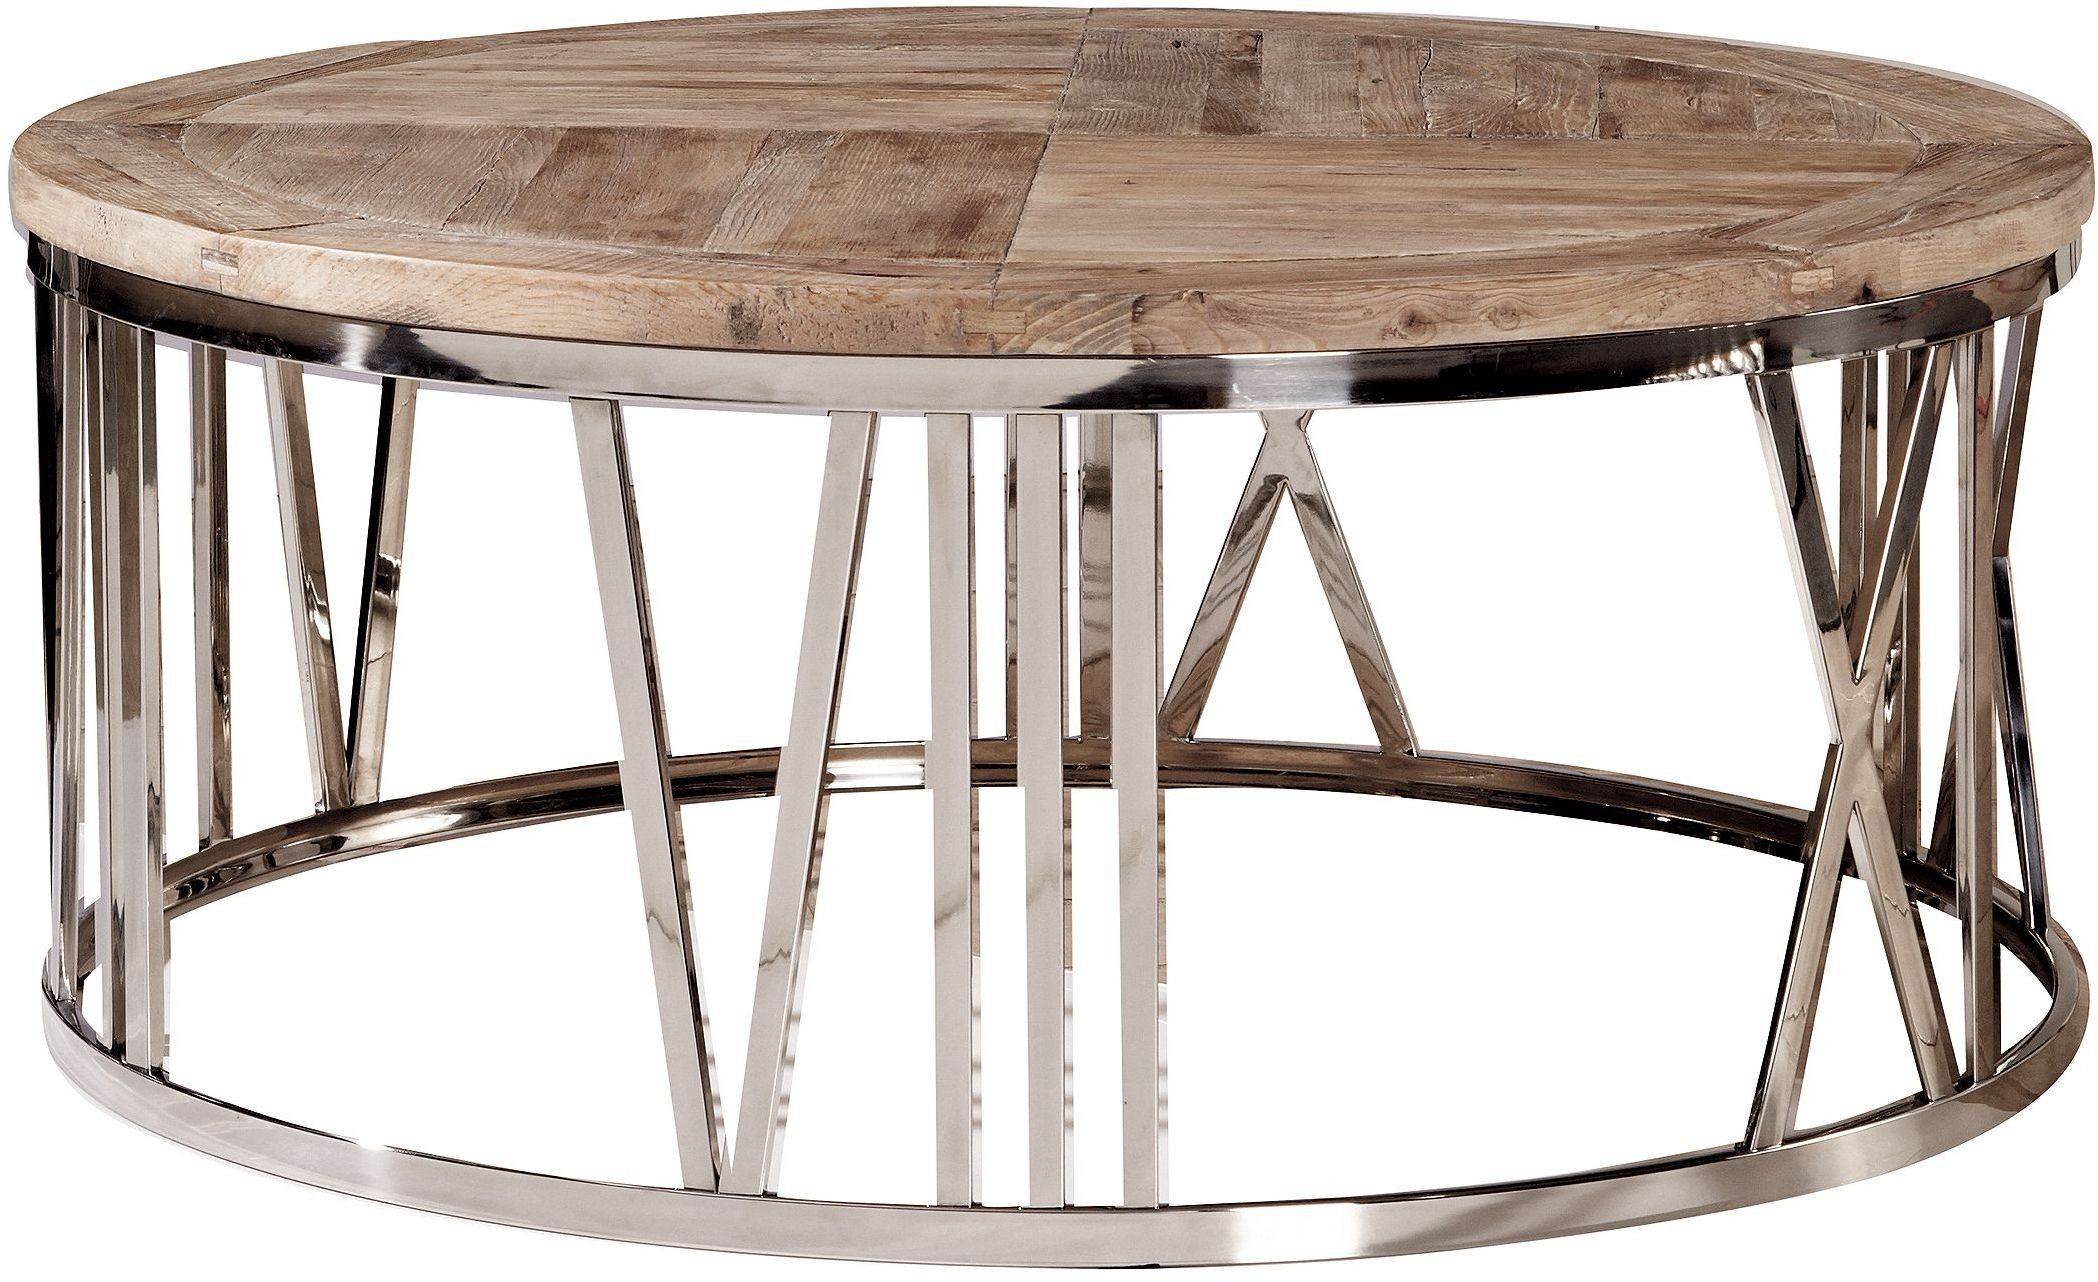 Steel Coffee Table Designs – 10 Superb Stainless Steel Coffee Table For Round Coffee Tables With Steel Frames (View 3 of 21)